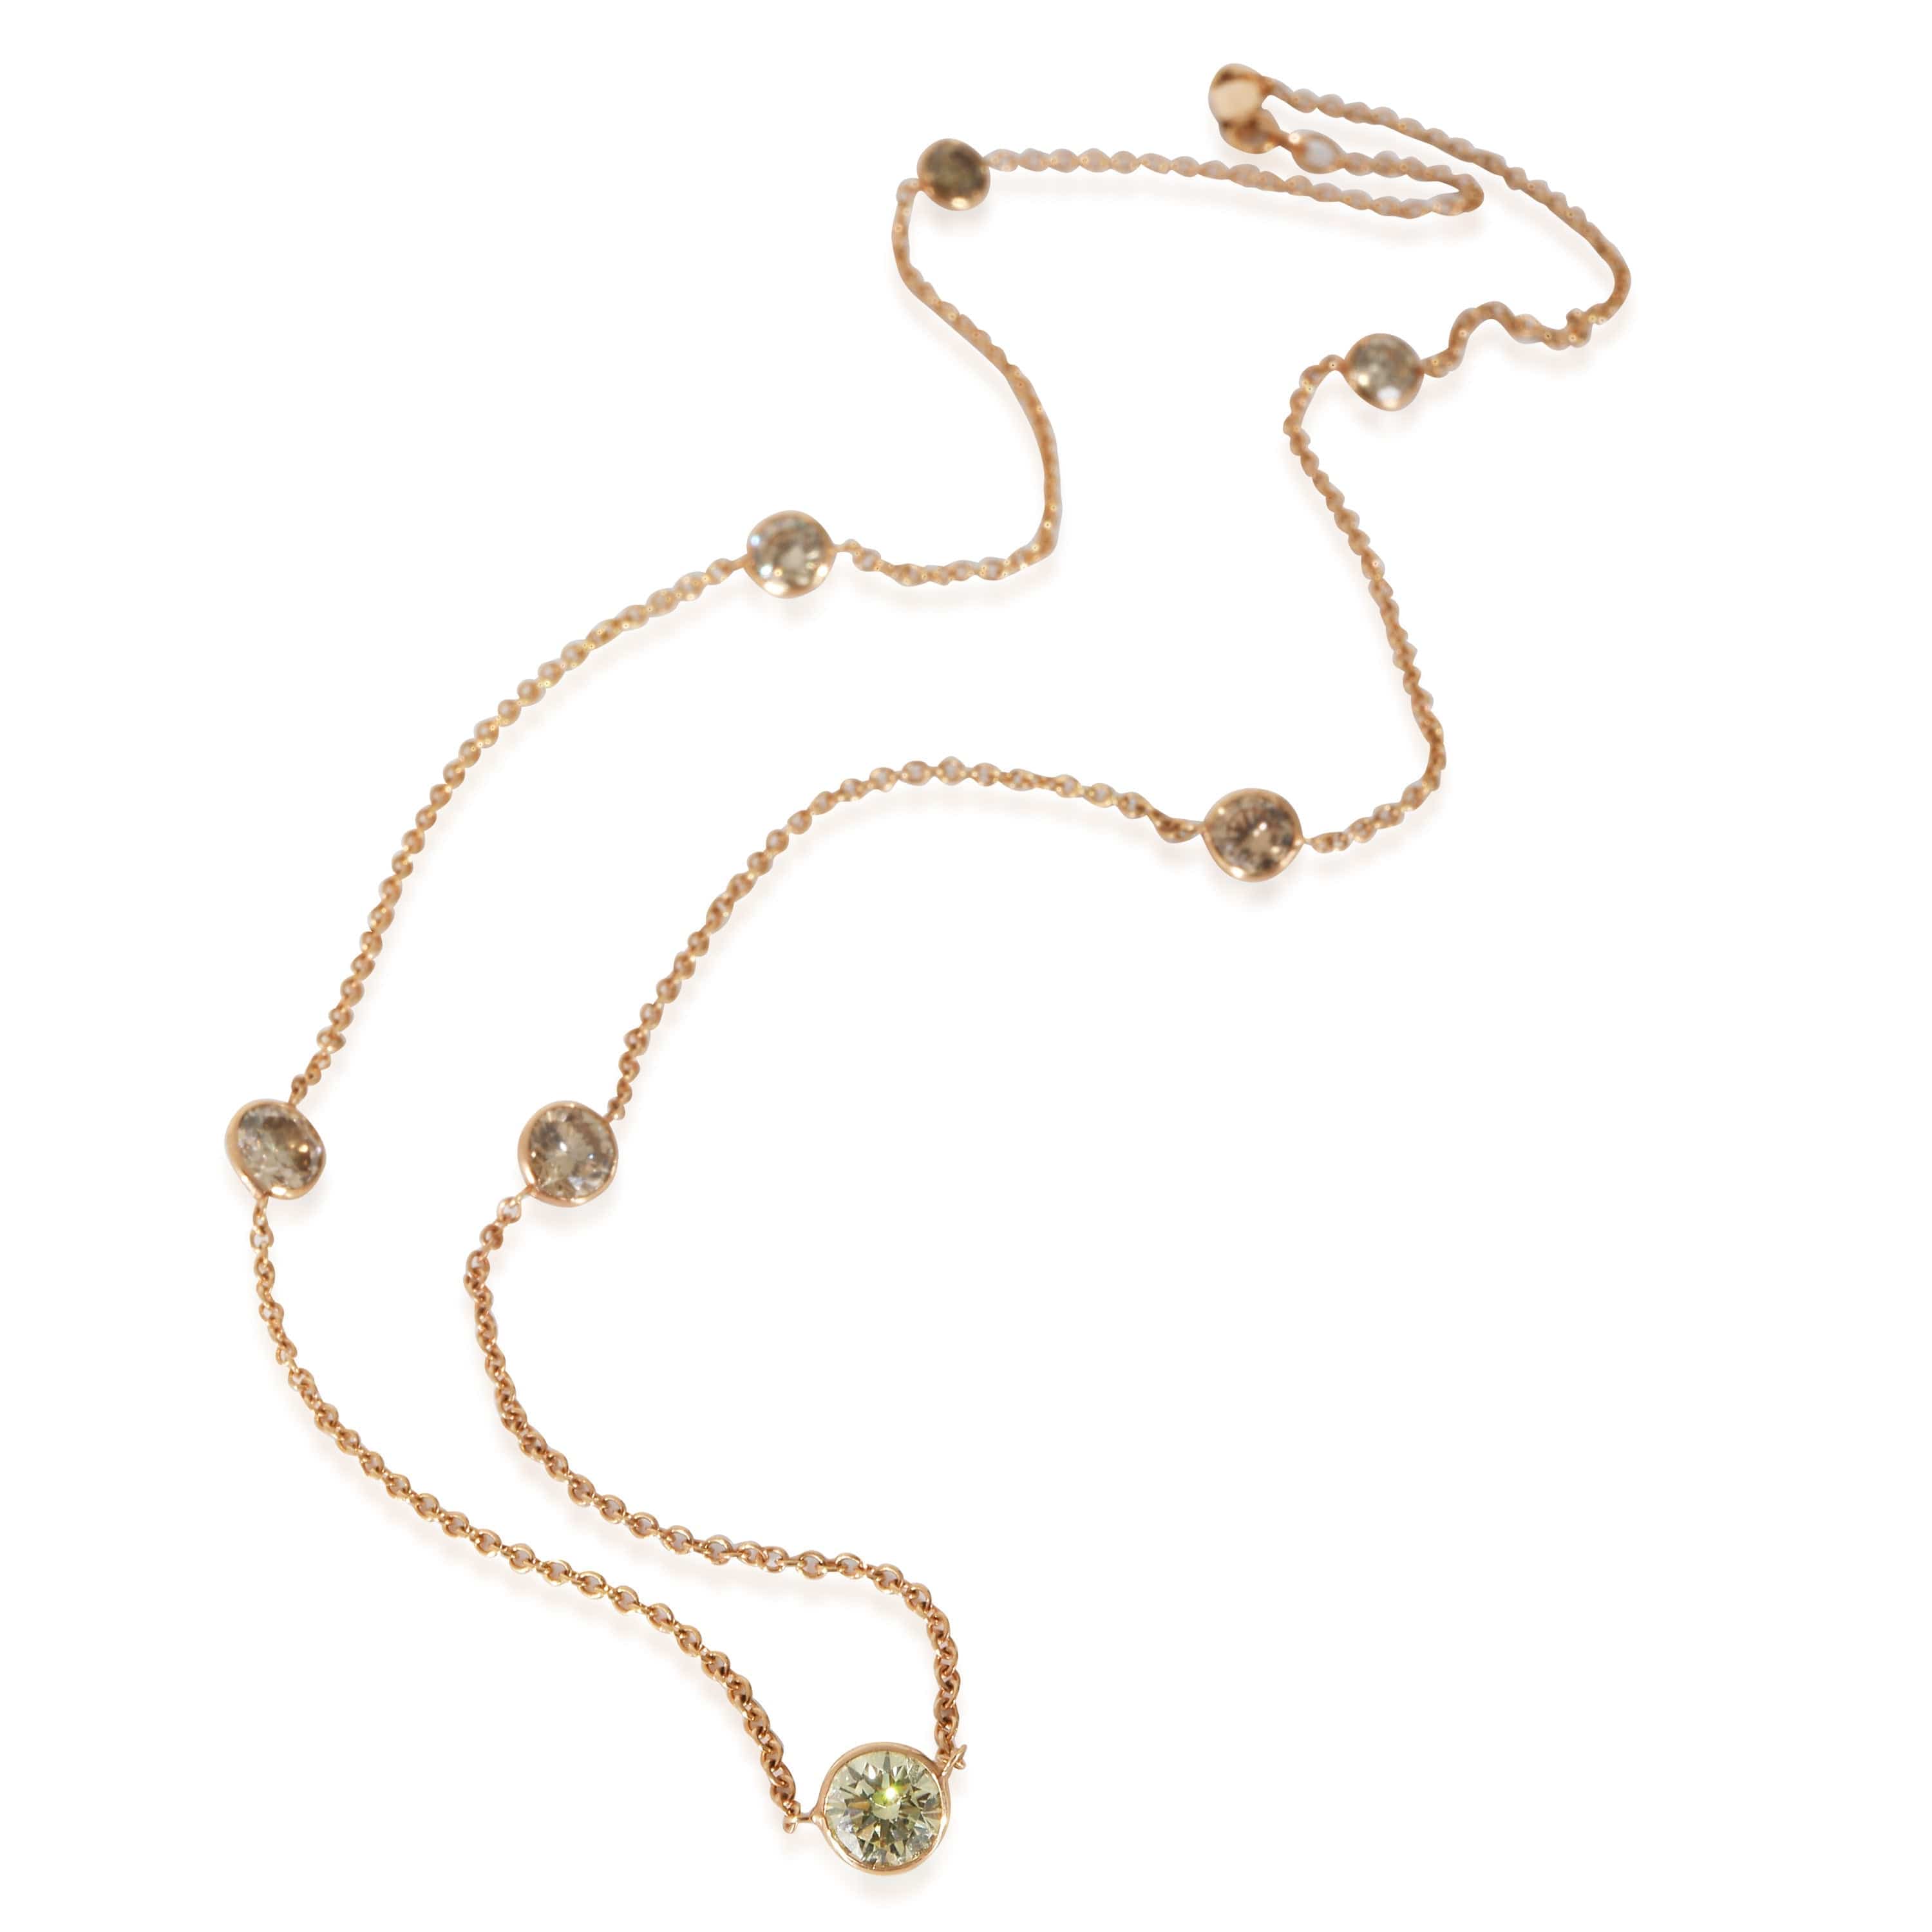 myGemma Fancy Brown Diamond by the Yard Necklace in 14KT Gold 4.35CTW